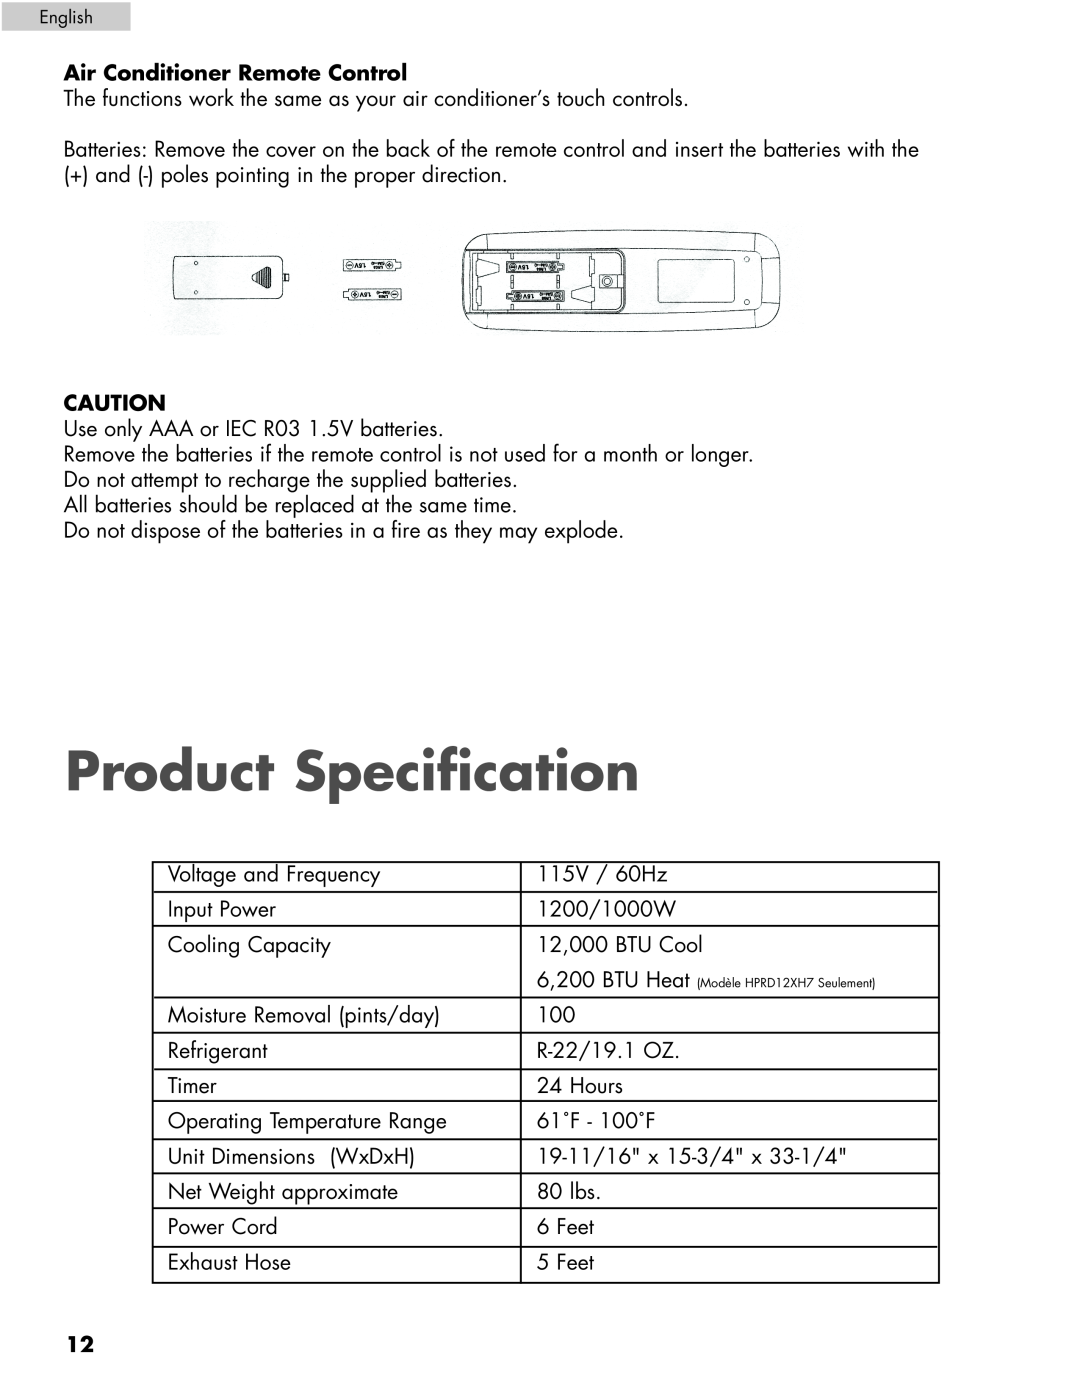 Haier HPRD12XH7, HPRD12XC7 user manual Product Specification, Air Conditioner Remote Control 